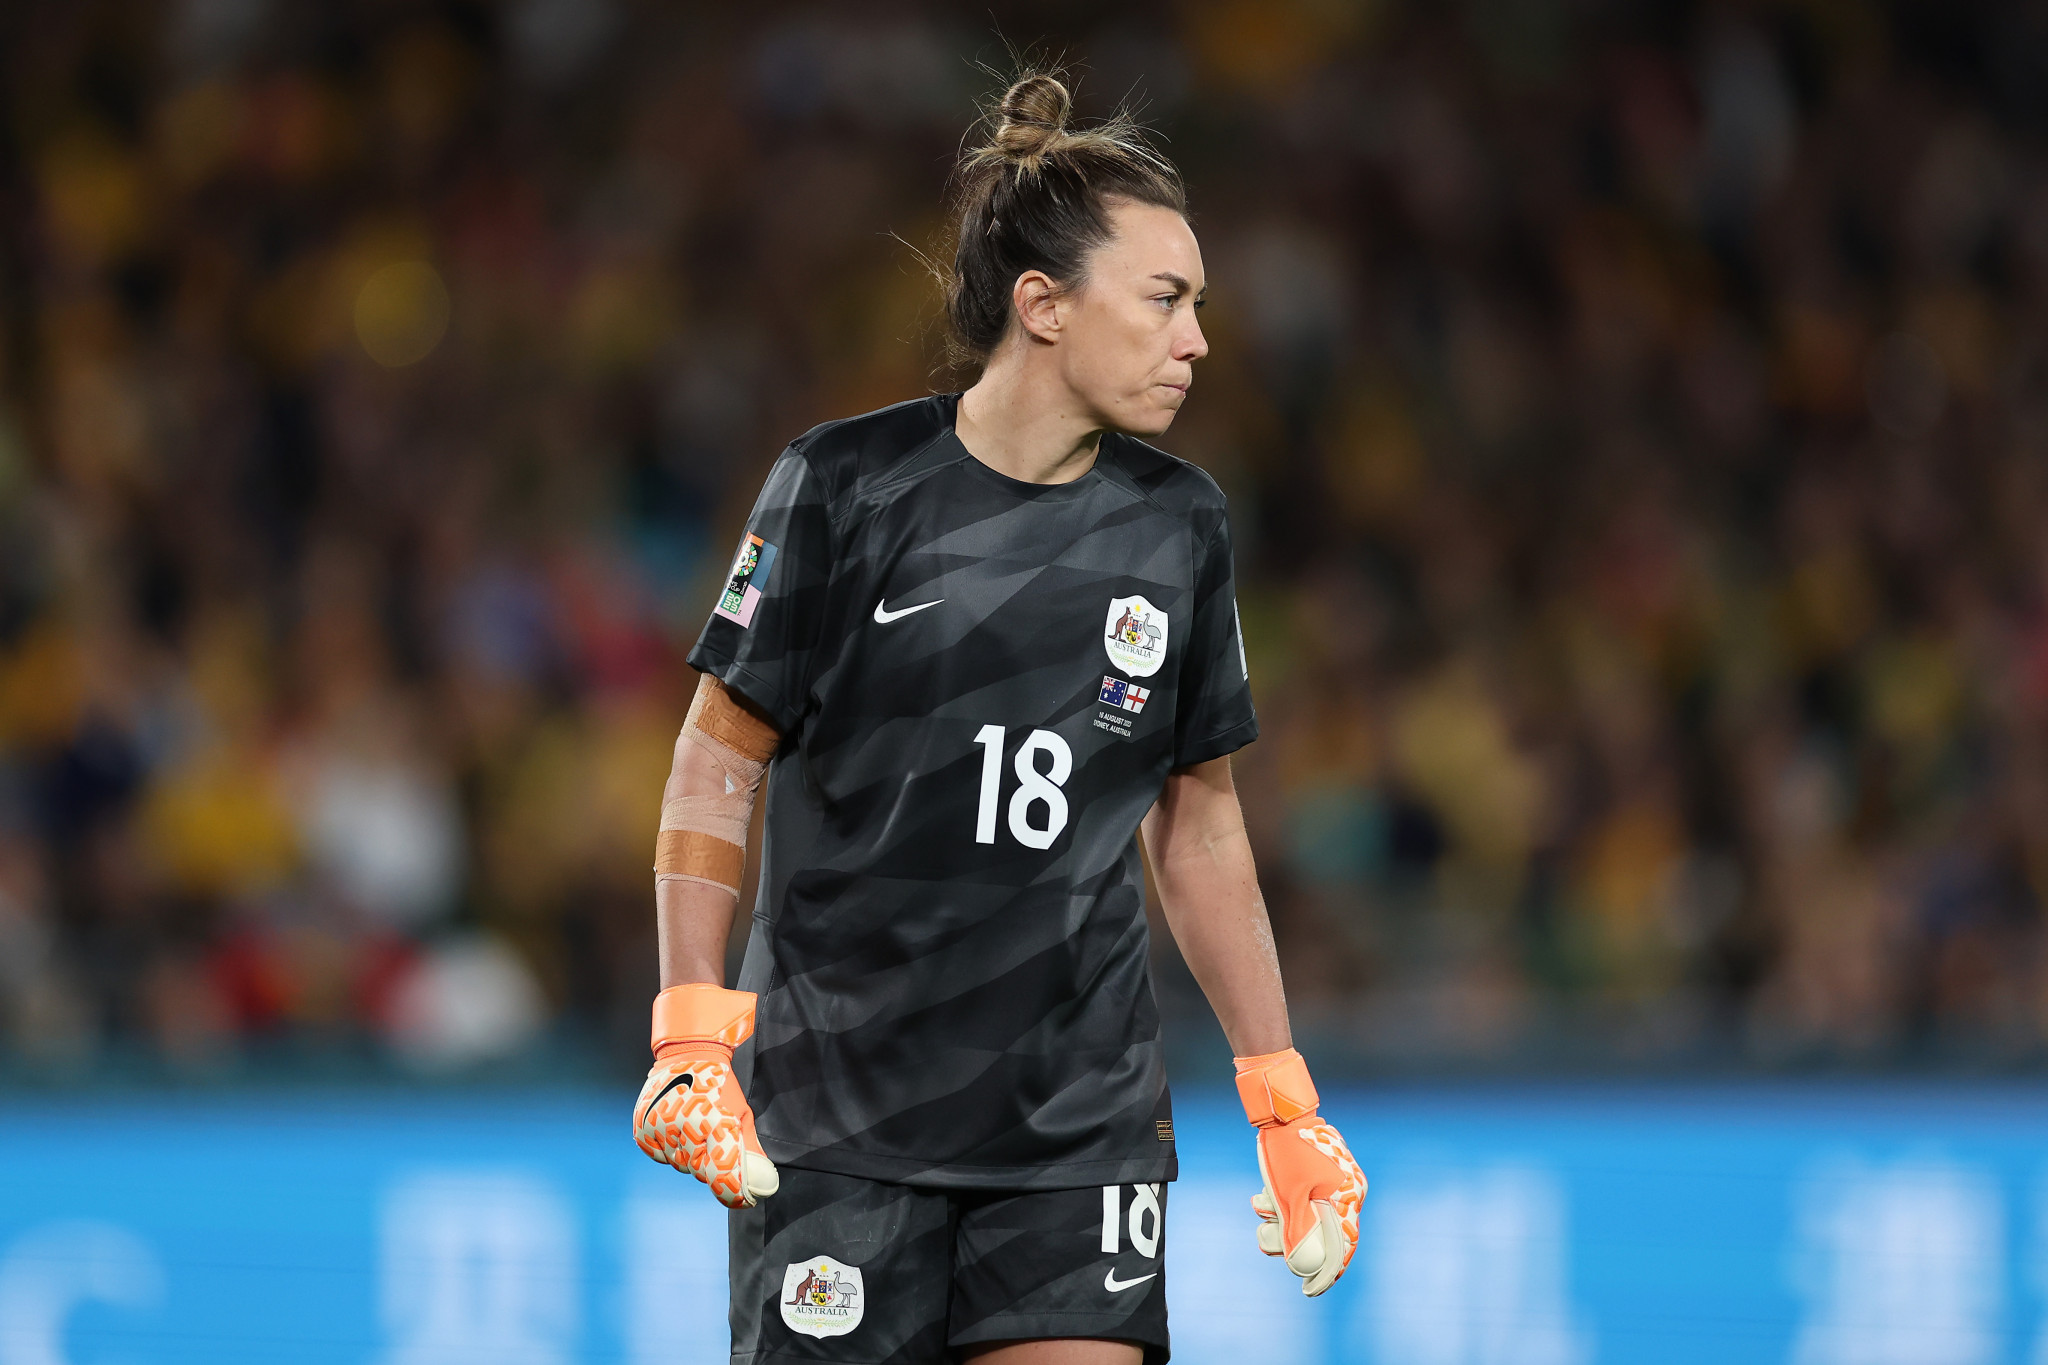 Fan furore erupts at decision not to manufacture women's goalkeeping tops